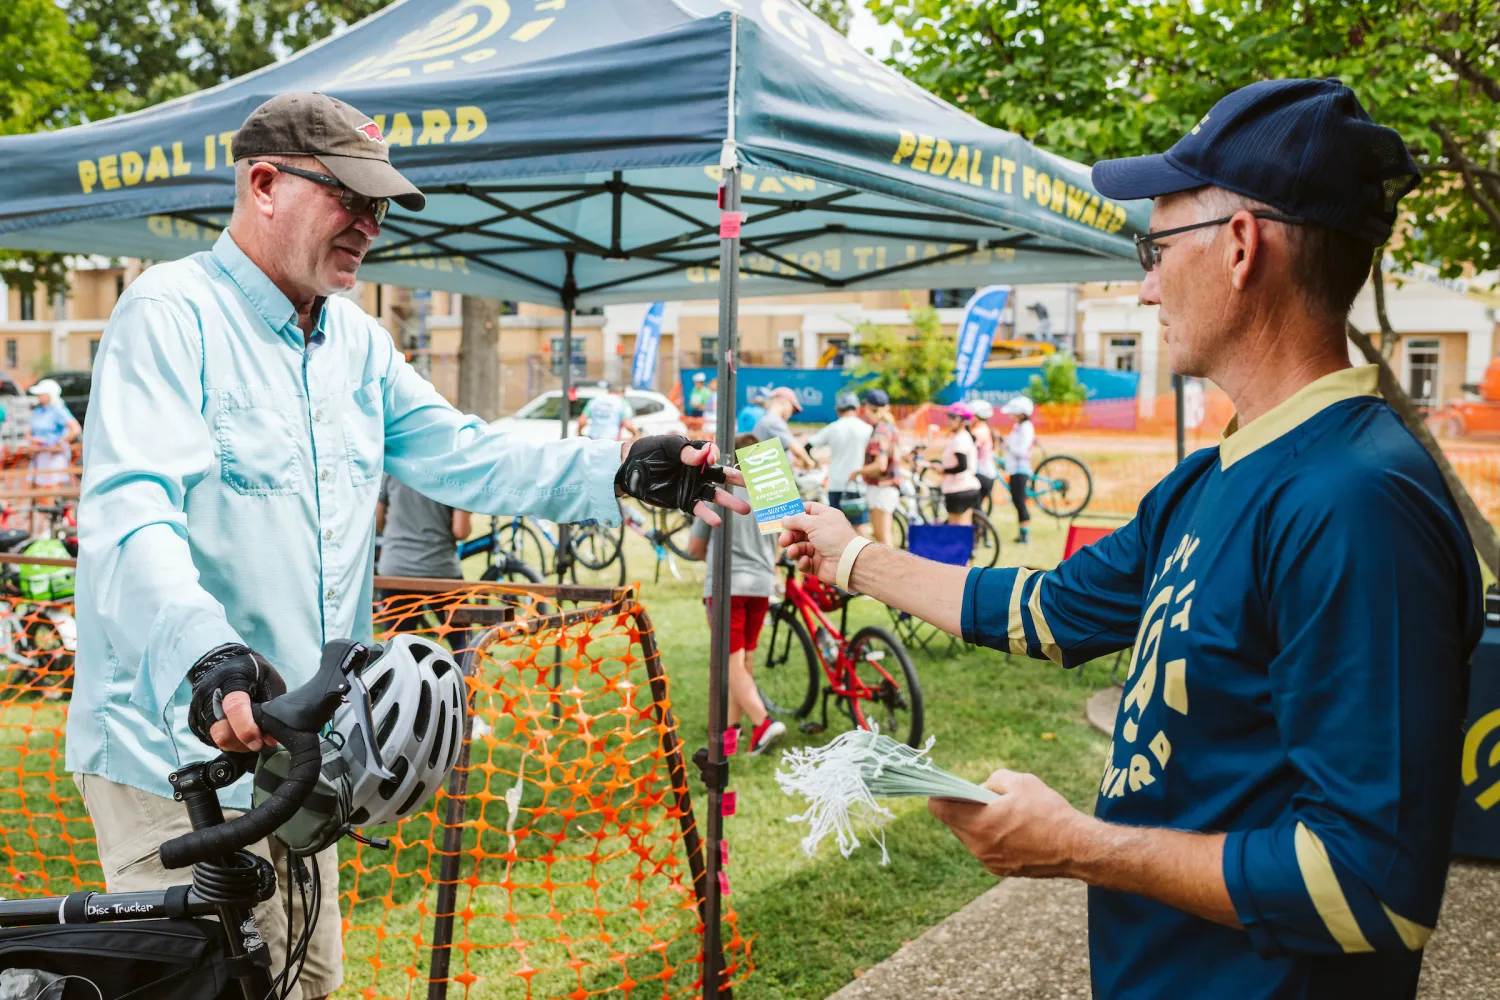 man checking in at Pedal It Forward bike valet